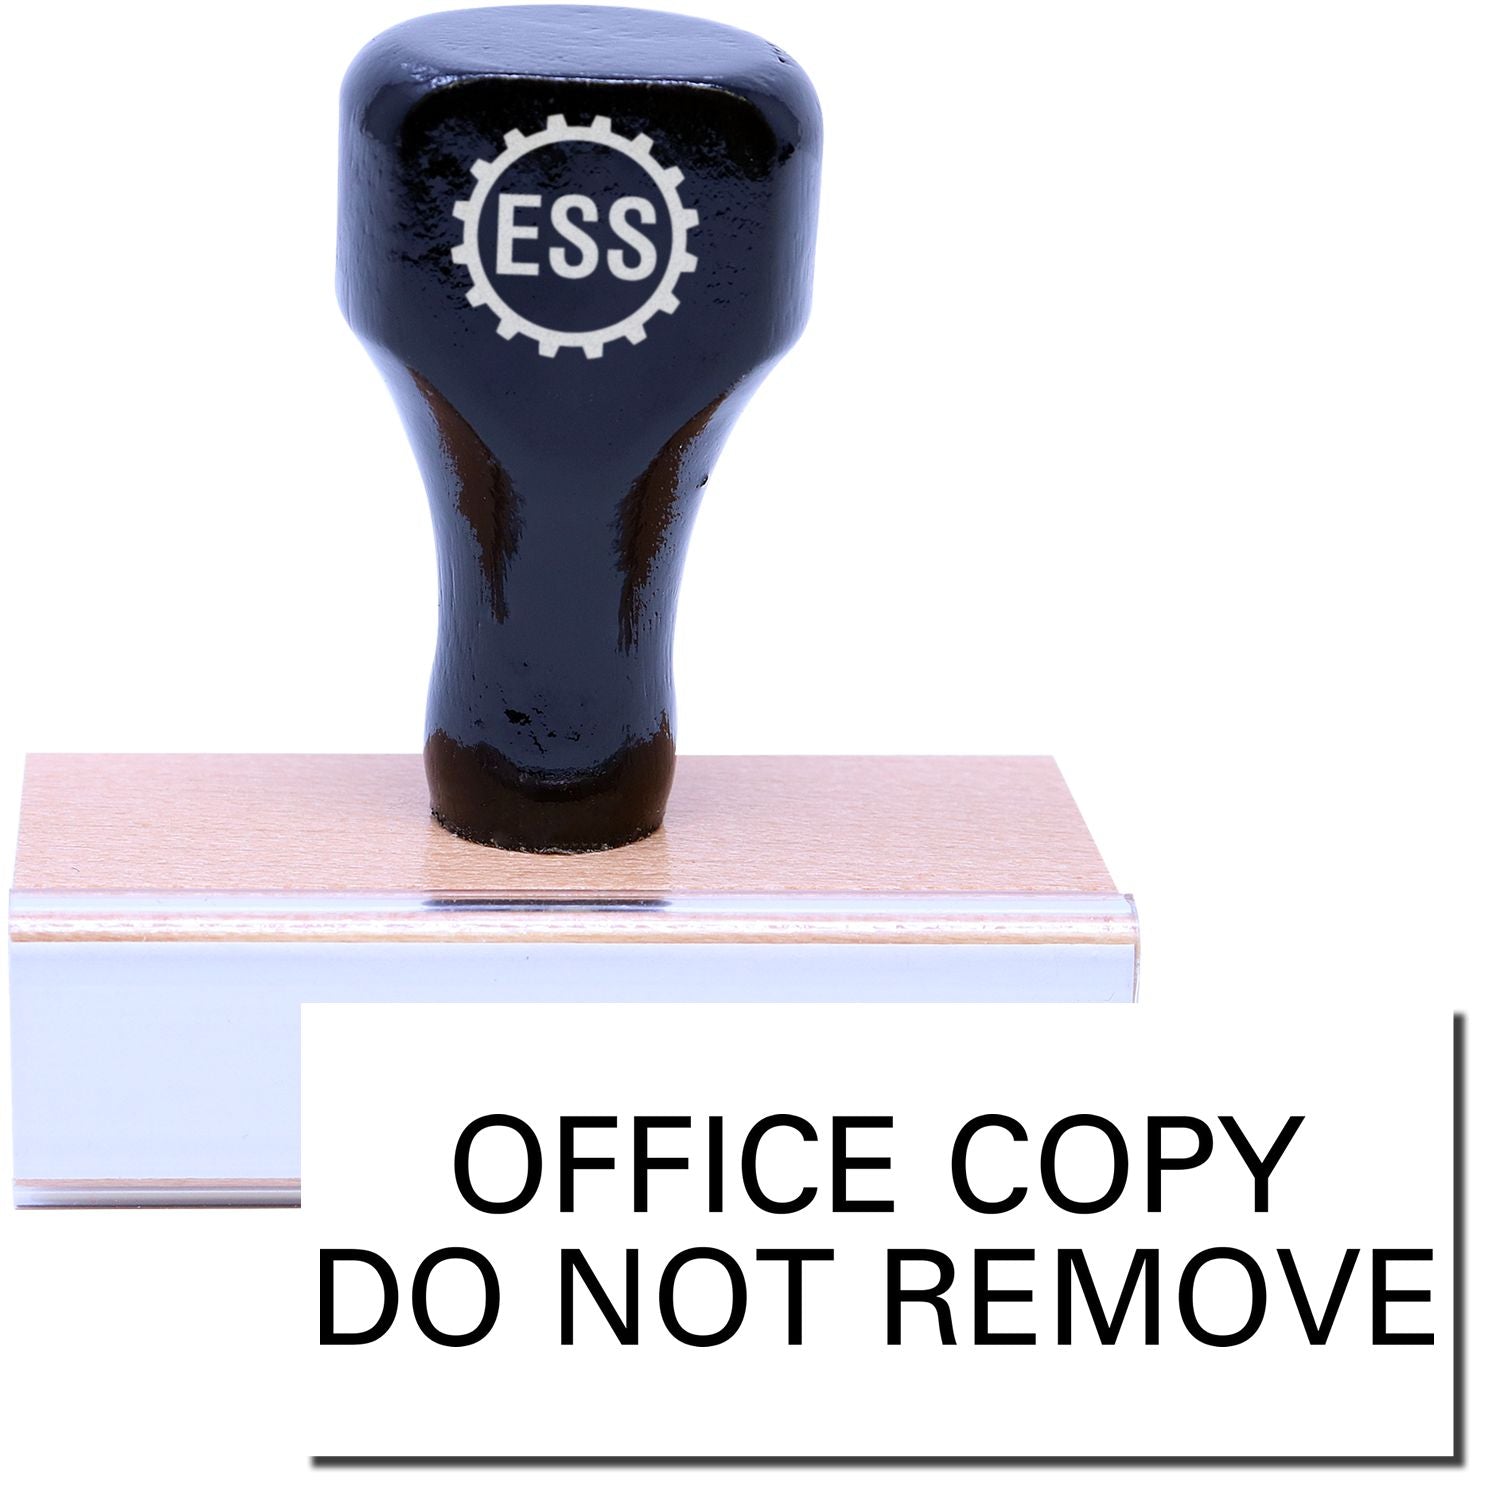 A stock office rubber stamp with a stamped image showing how the text "OFFICE COPY DO NOT REMOVE" is displayed after stamping.